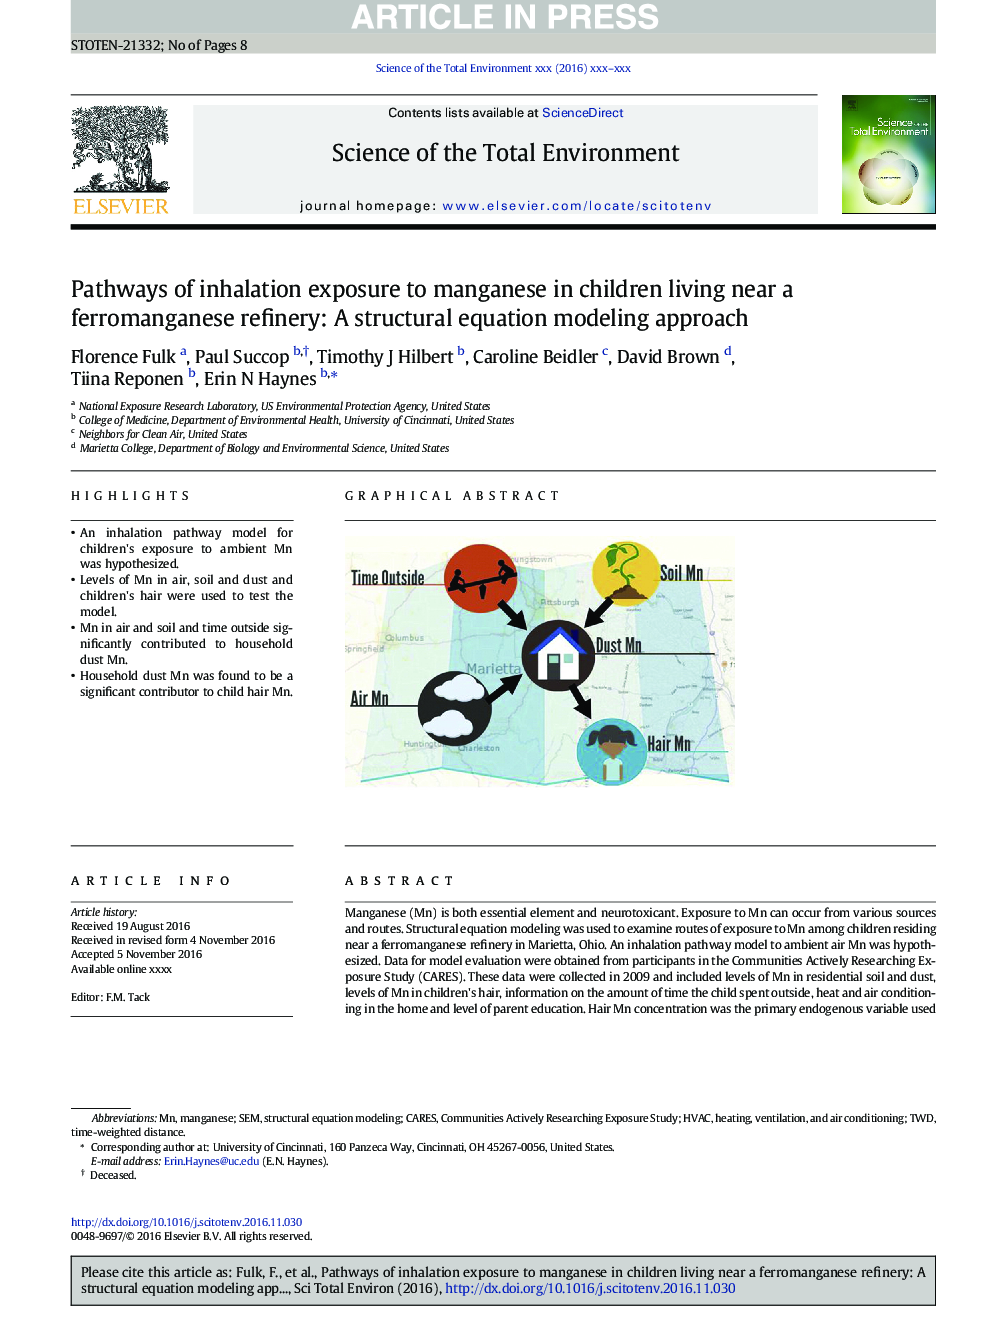 Pathways of inhalation exposure to manganese in children living near a ferromanganese refinery: A structural equation modeling approach